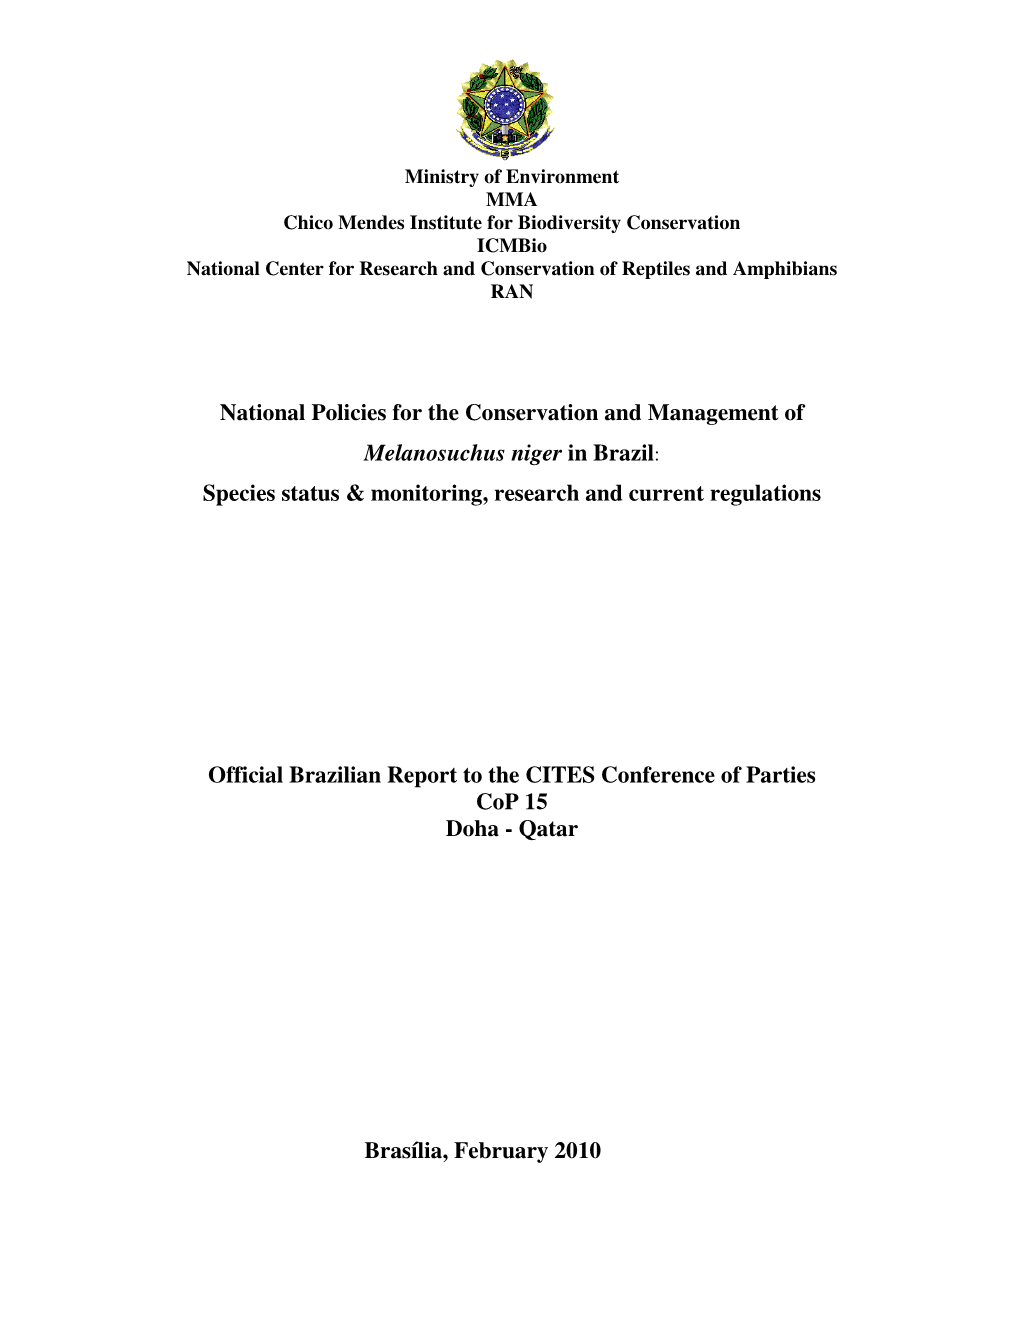 National Policies for the Conservation and Management of Melanosuchus Niger in Brazil : Species Status & Monitoring, Research and Current Regulations